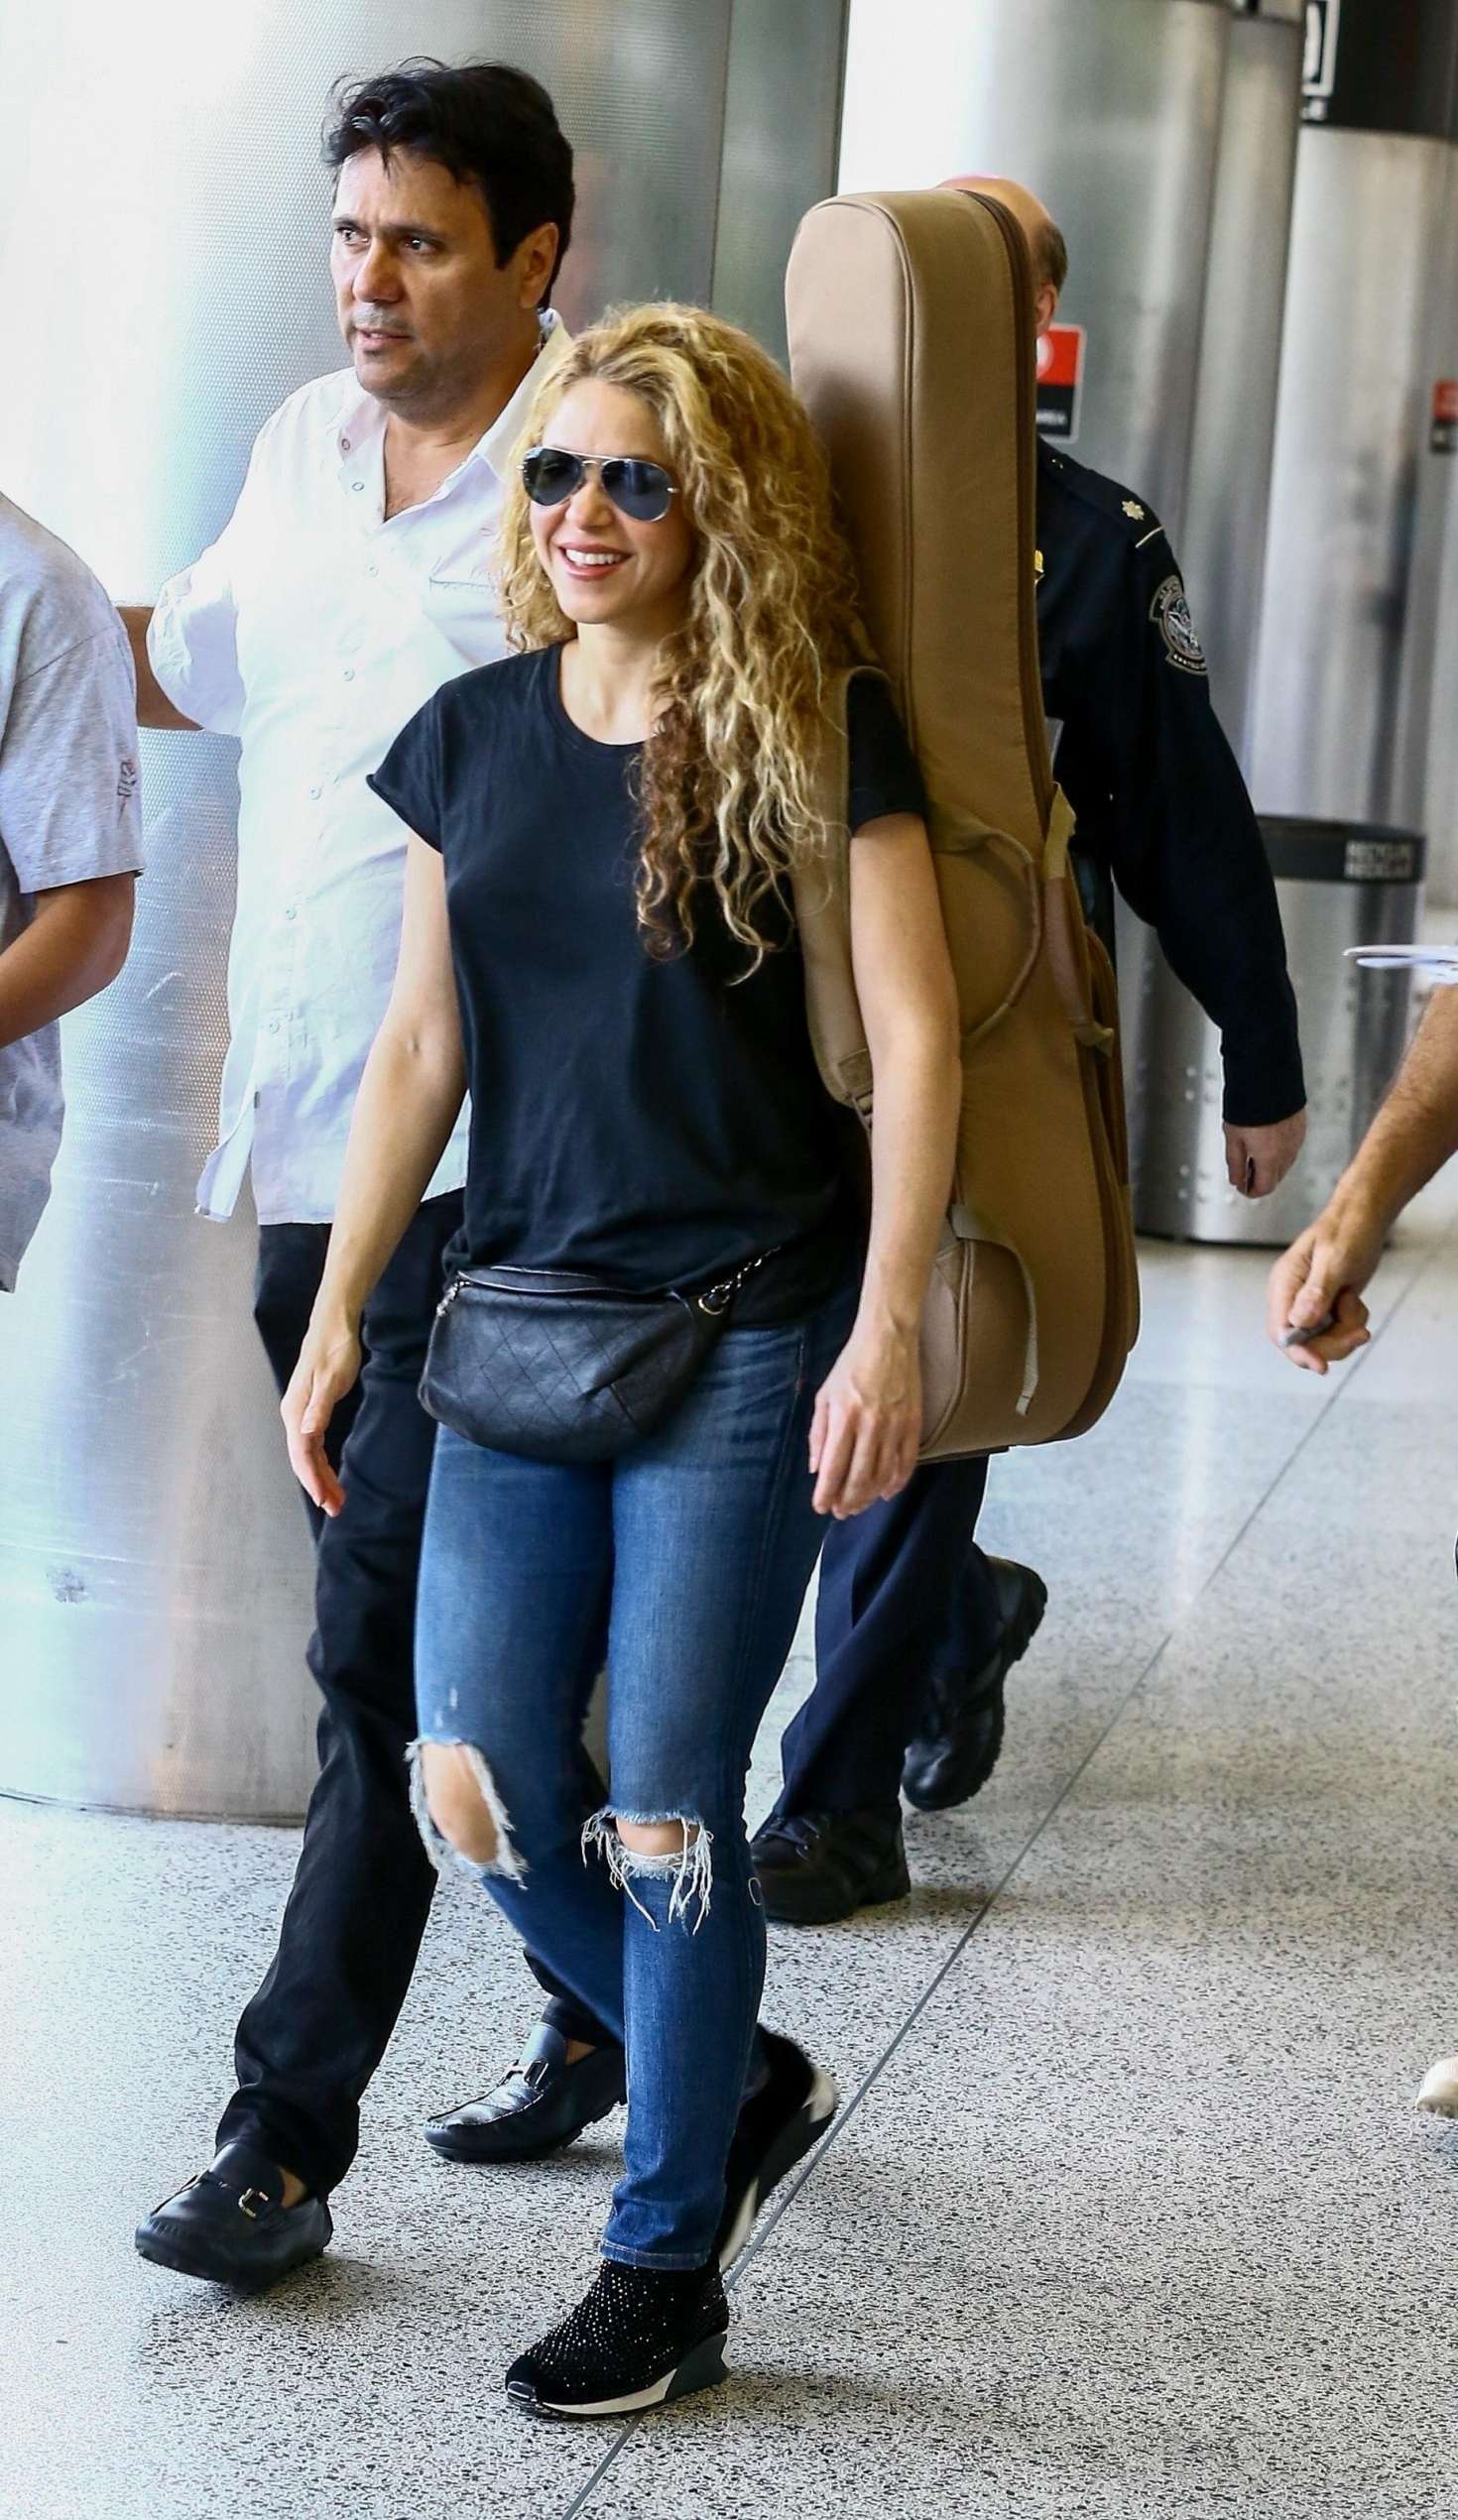 Shakira in Ripped Jeans at Airport in Miami -08 | GotCeleb